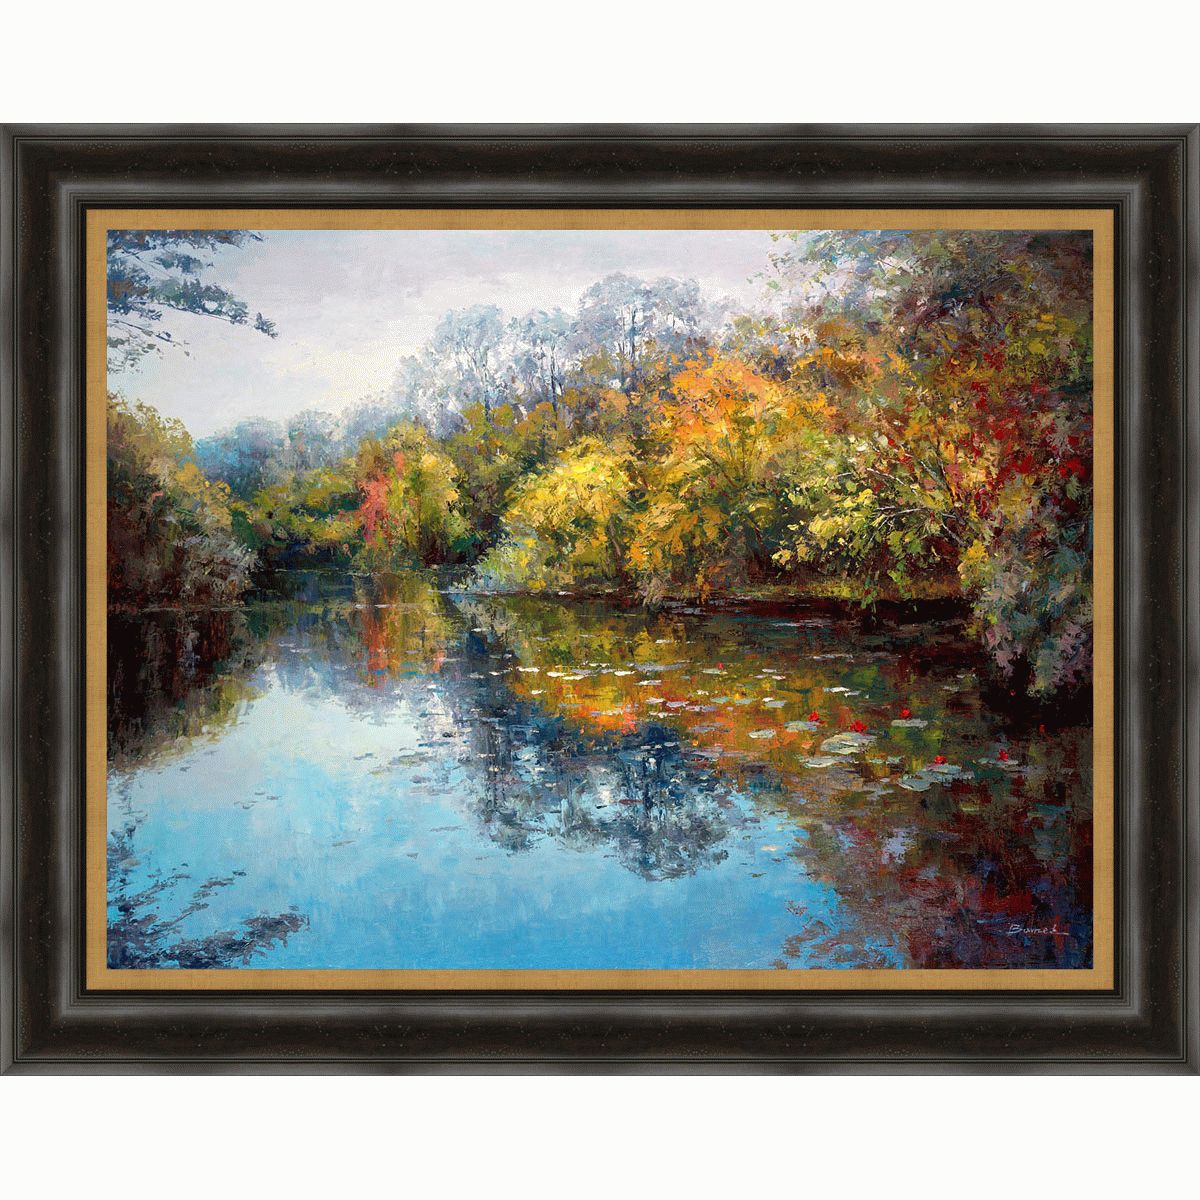 Autumn Pond Framed Wall Art Within Most Current Wall Framed Art Prints (Gallery 20 of 20)